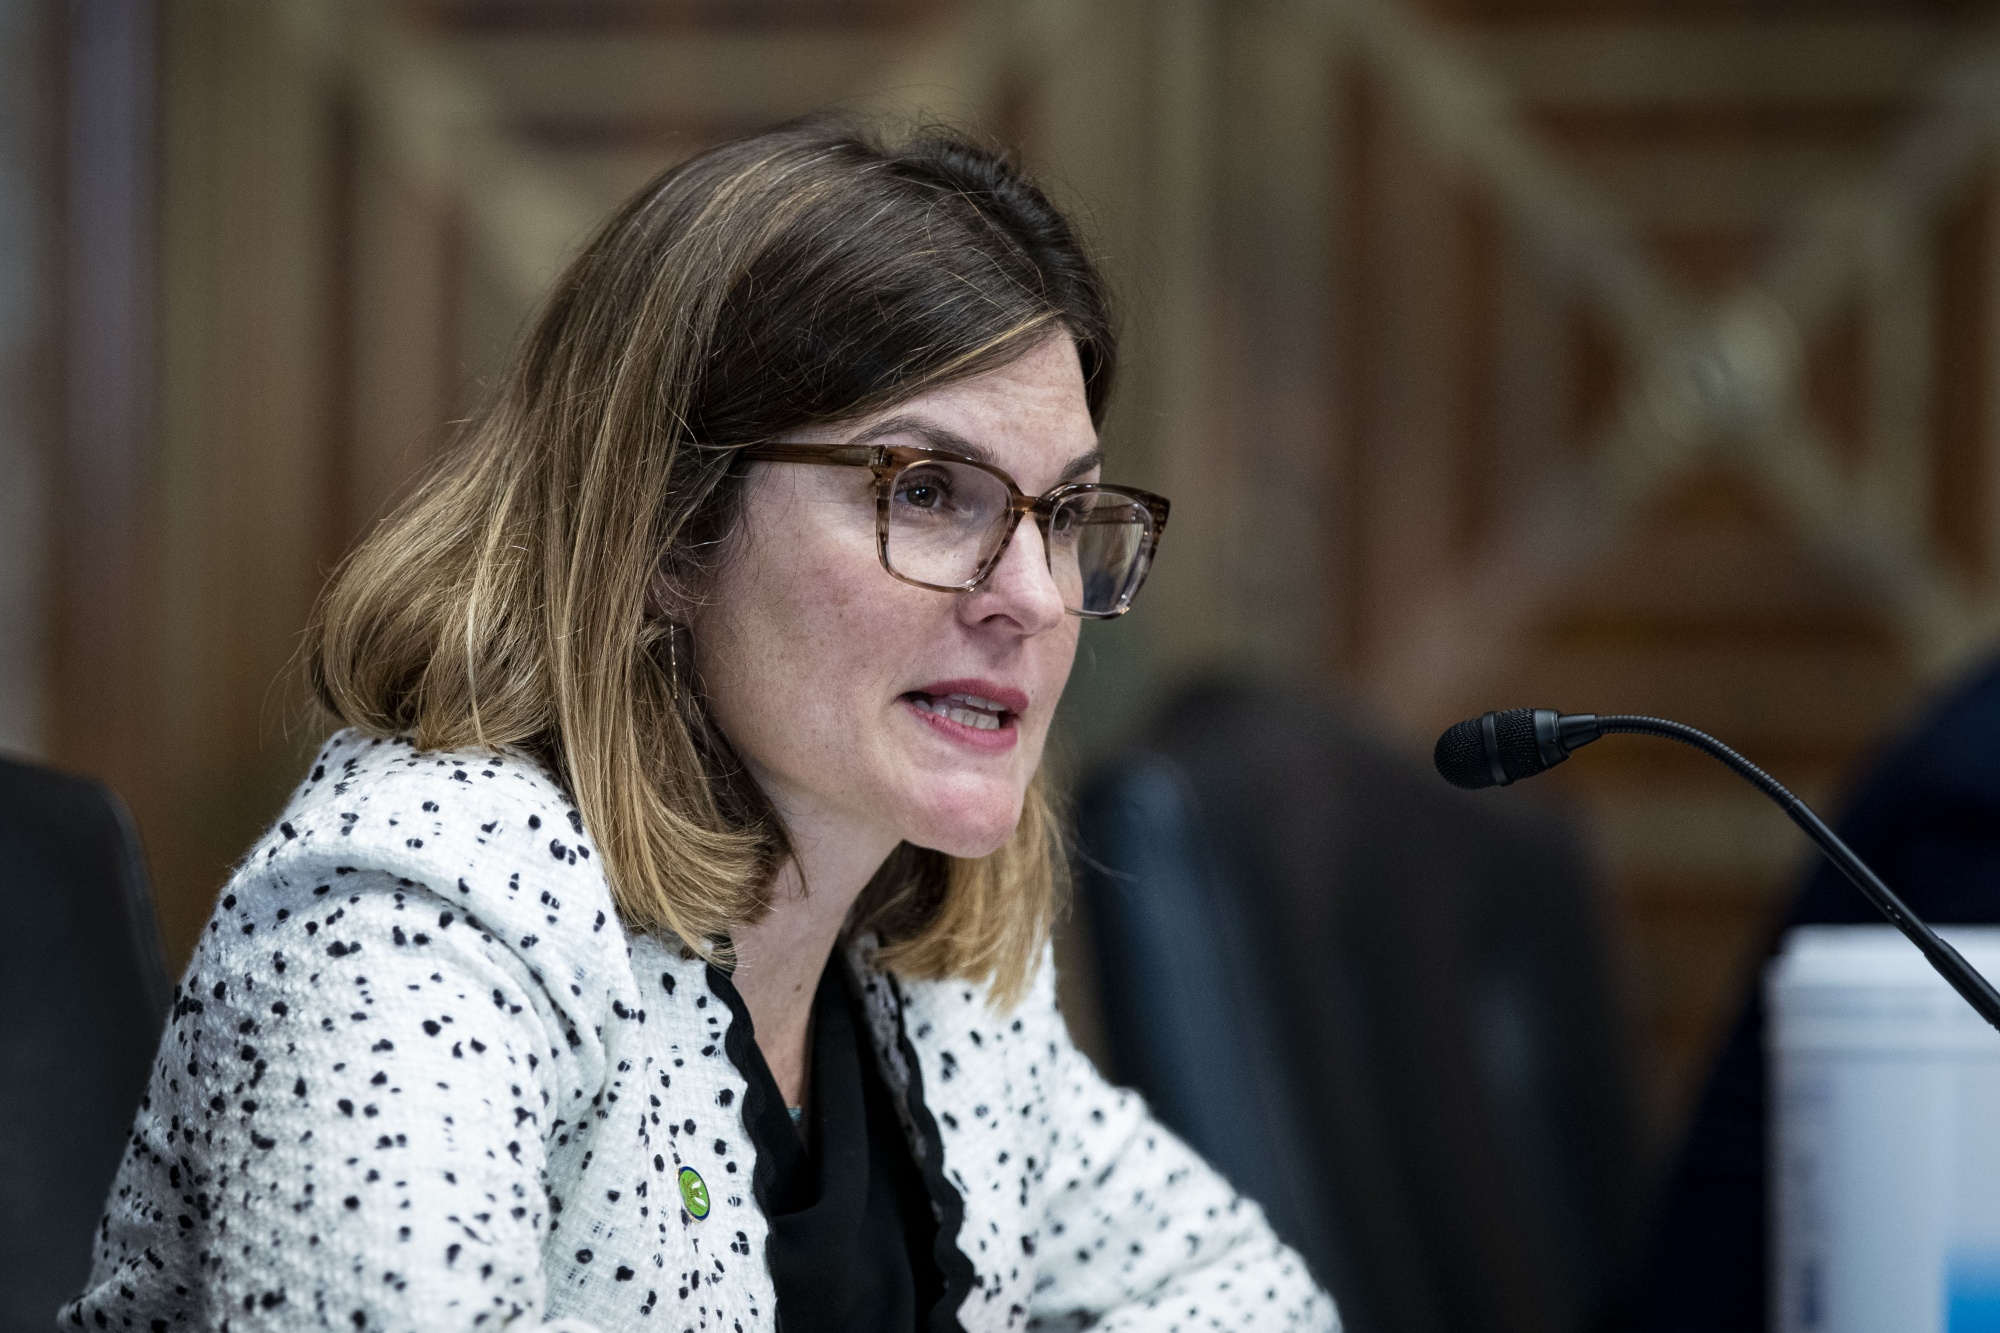 Allison Clements speaks during a Senate Energy and Natural Resources Committee hearing in 2021.